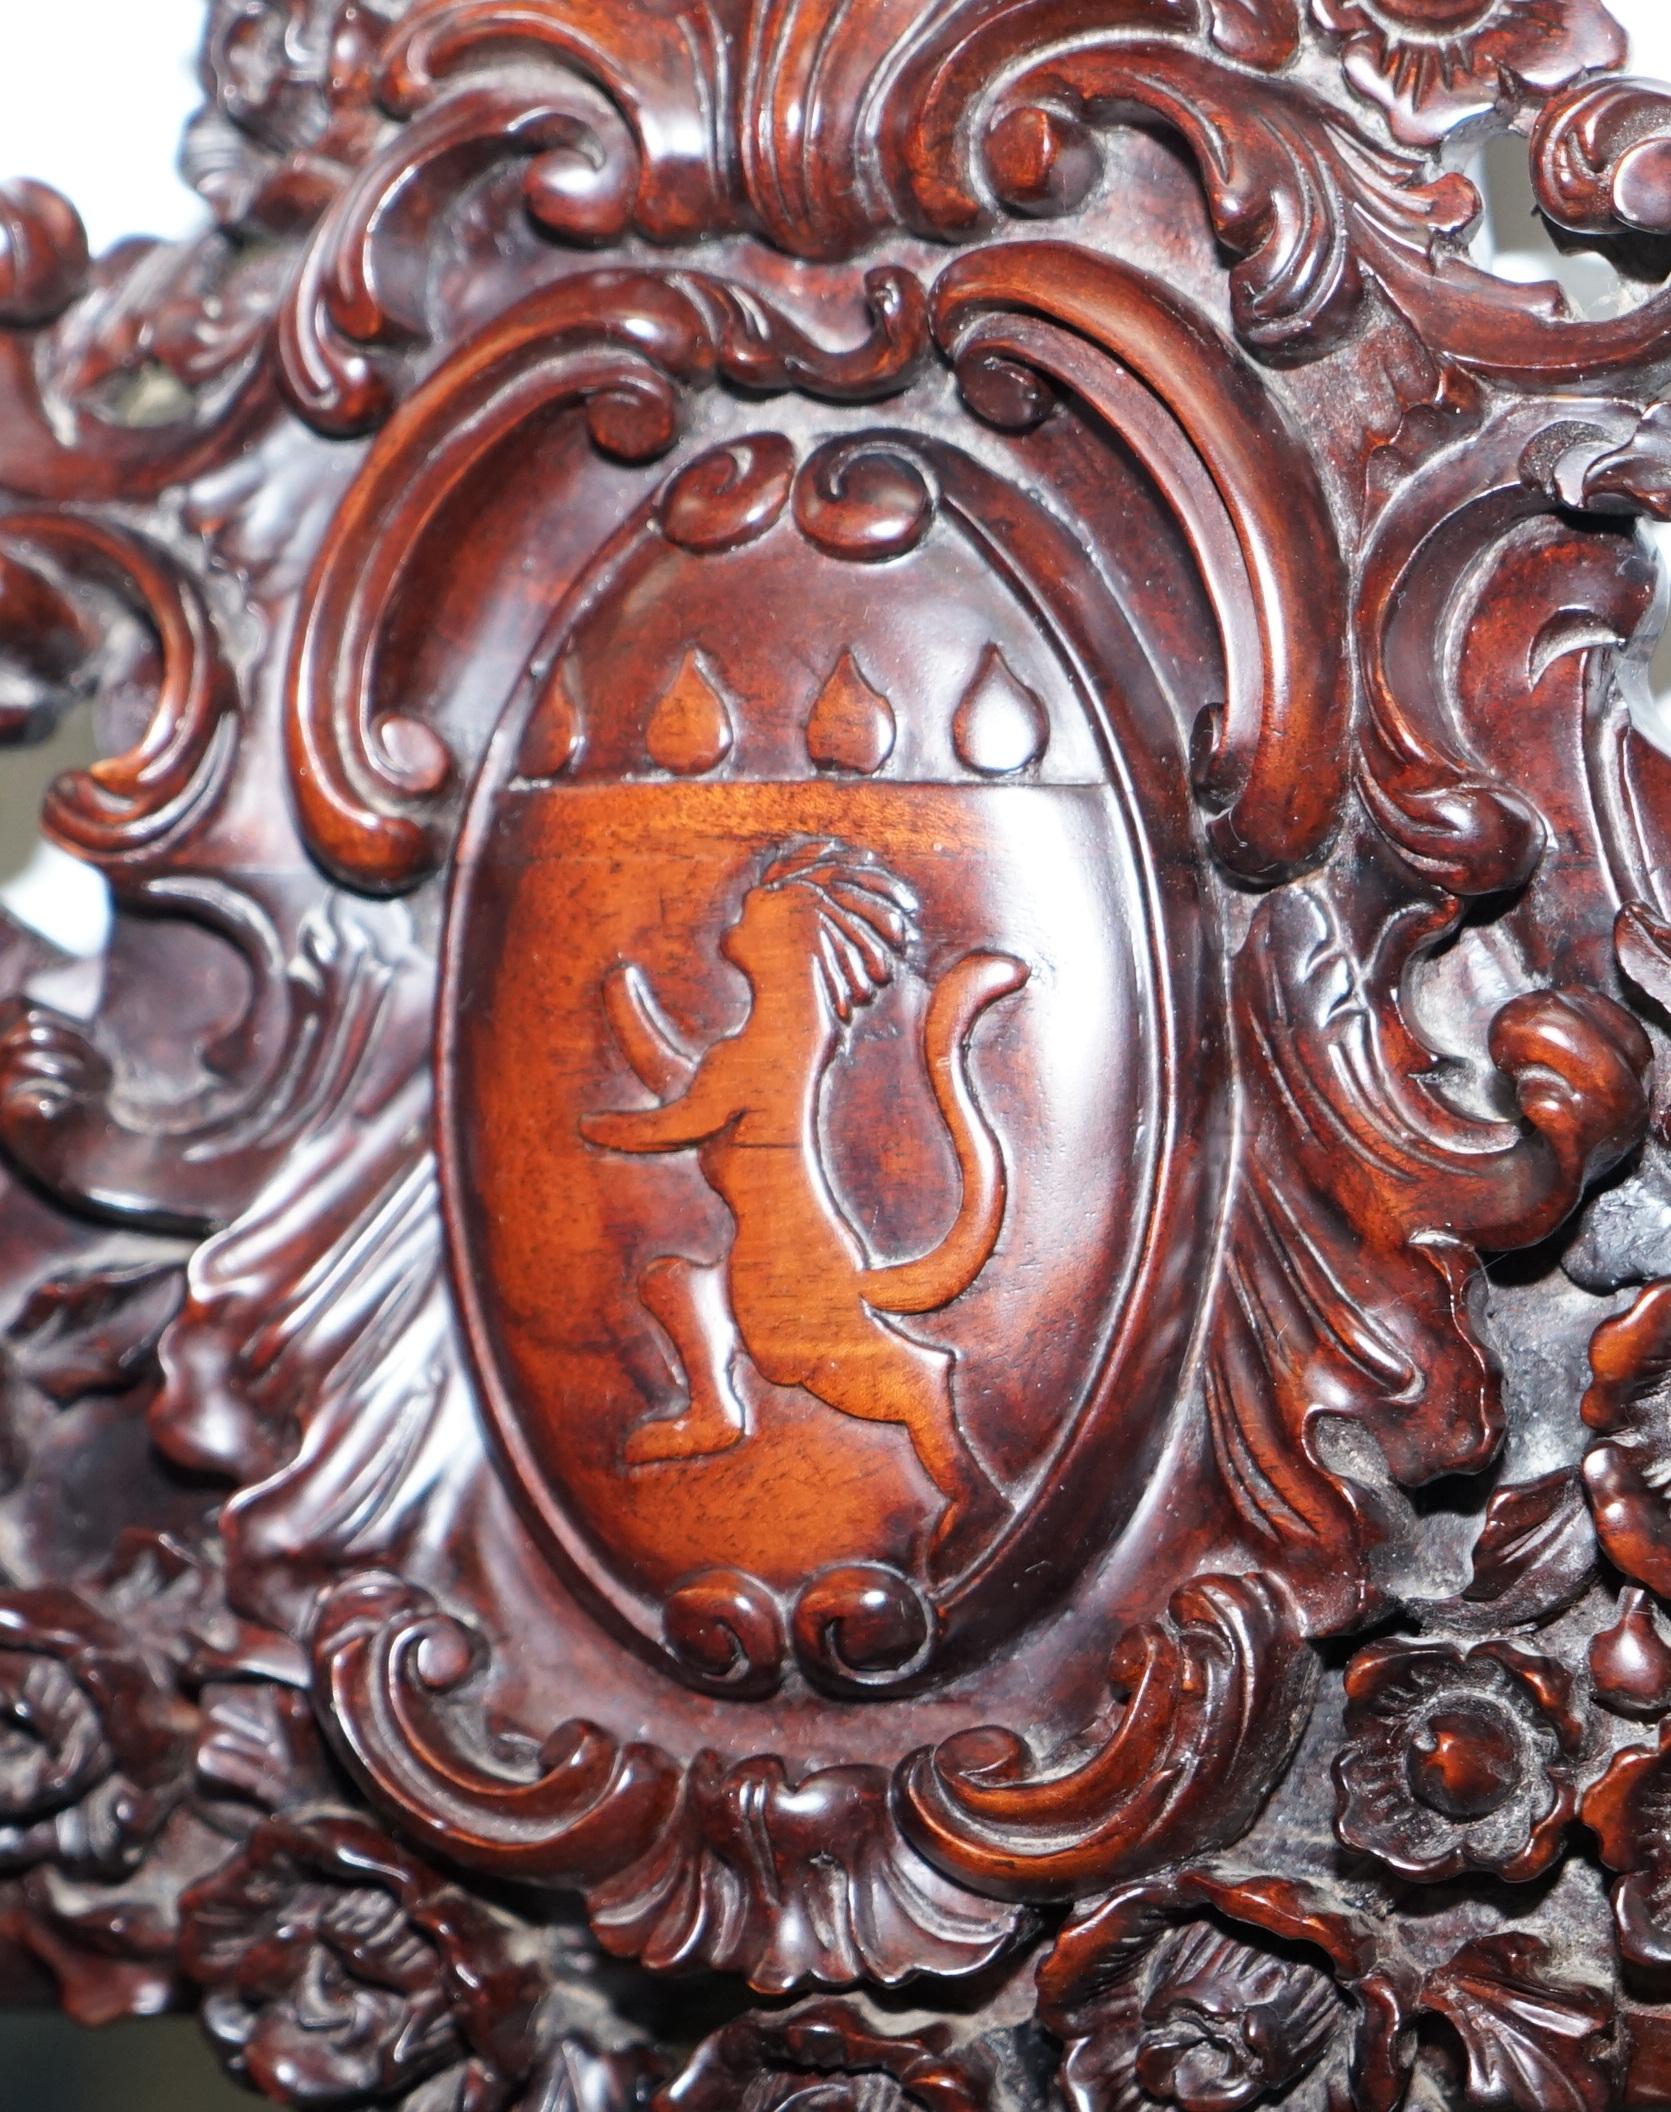 English Hand Carved Ornate Mahogany Mirror with Armorial Crest Horns Animals Flowers Cow